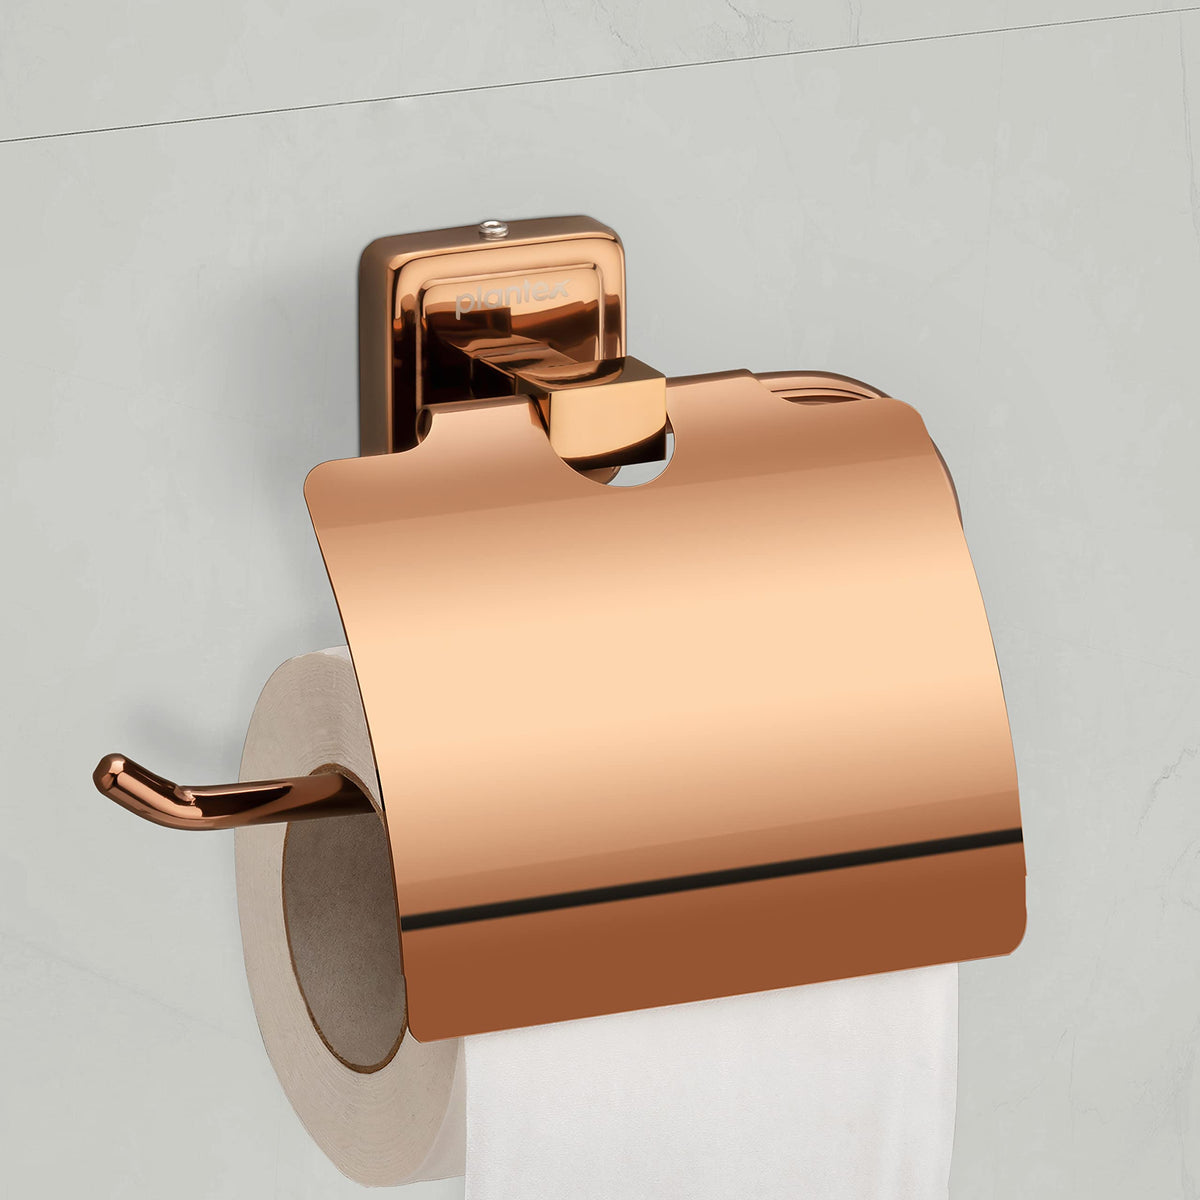 Plantex 304 Grade Stainless Steel Decan Toilet Paper Roll Holder/Tissue Paper Holder for Bathroom/Bathroom Accessories - Pack of 2 (648 - PVD Rose Gold)